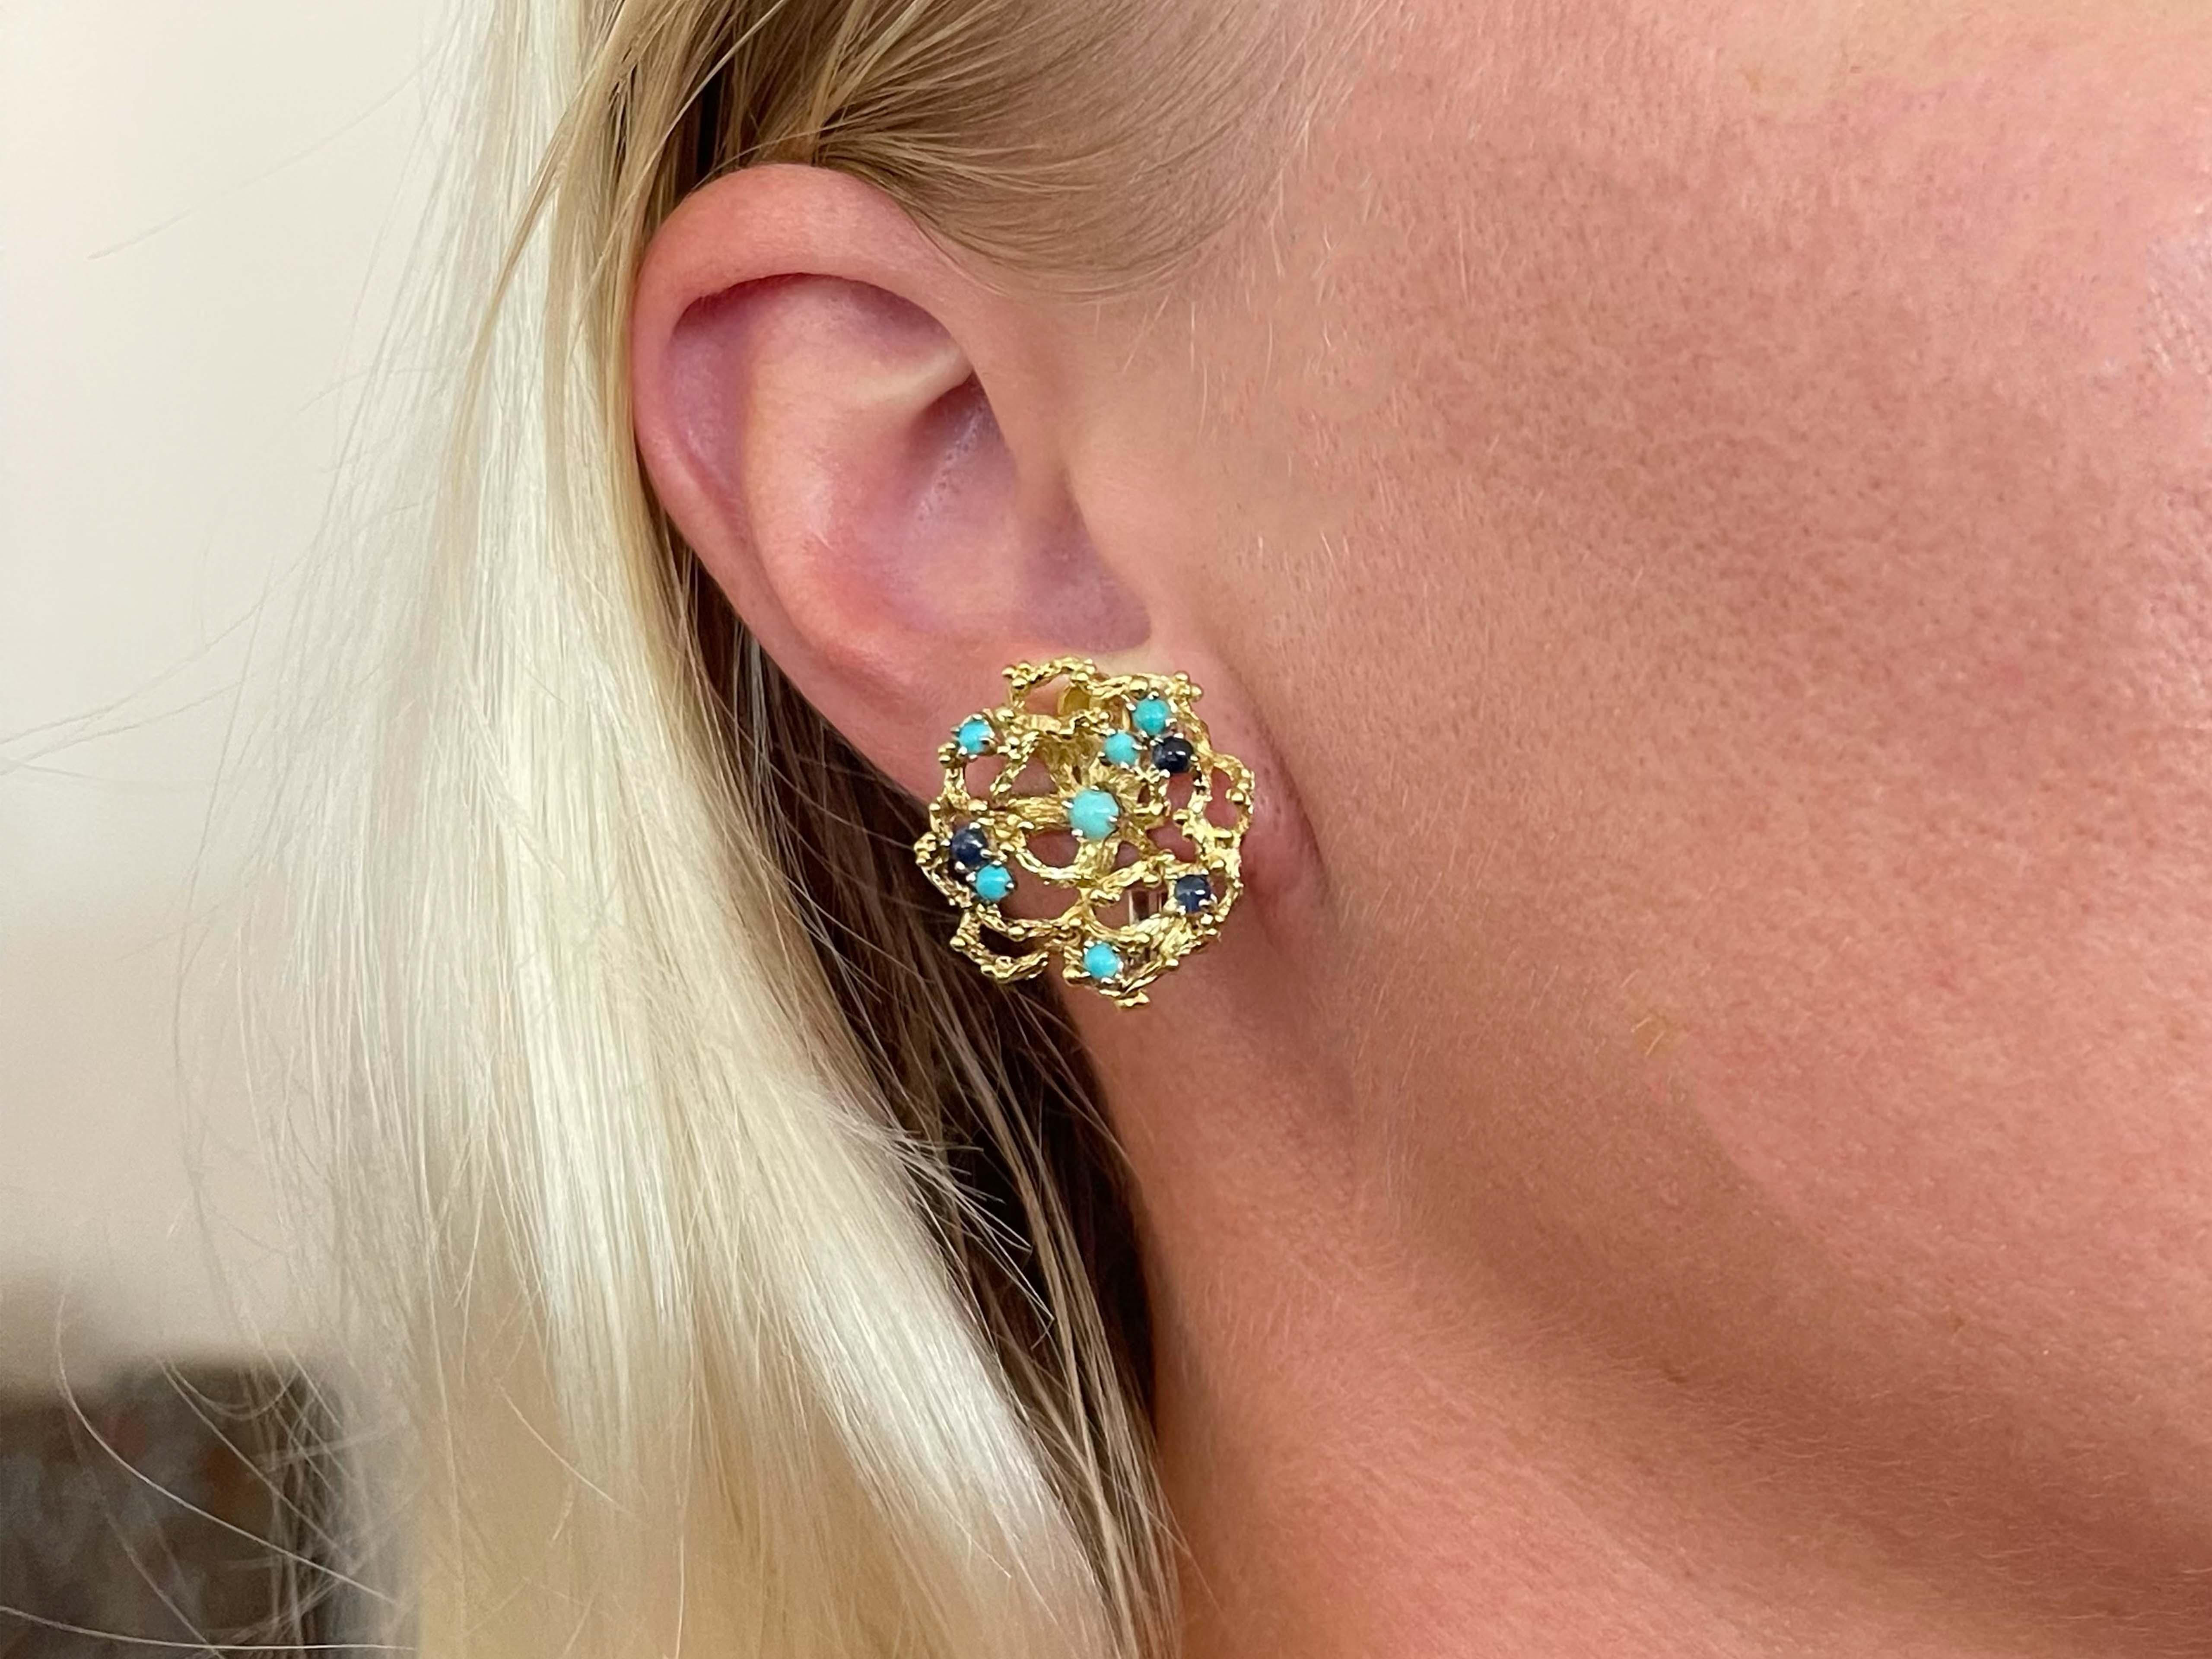 Earrings Specifications:

Metal: 18K Yellow Gold

Total Weight: 12.7 Grams

Gemstone: 6 Sapphire and 12 Turquoise

Earring Measurements: 23.5 mm diameter

Condition: Preowned, Excellent